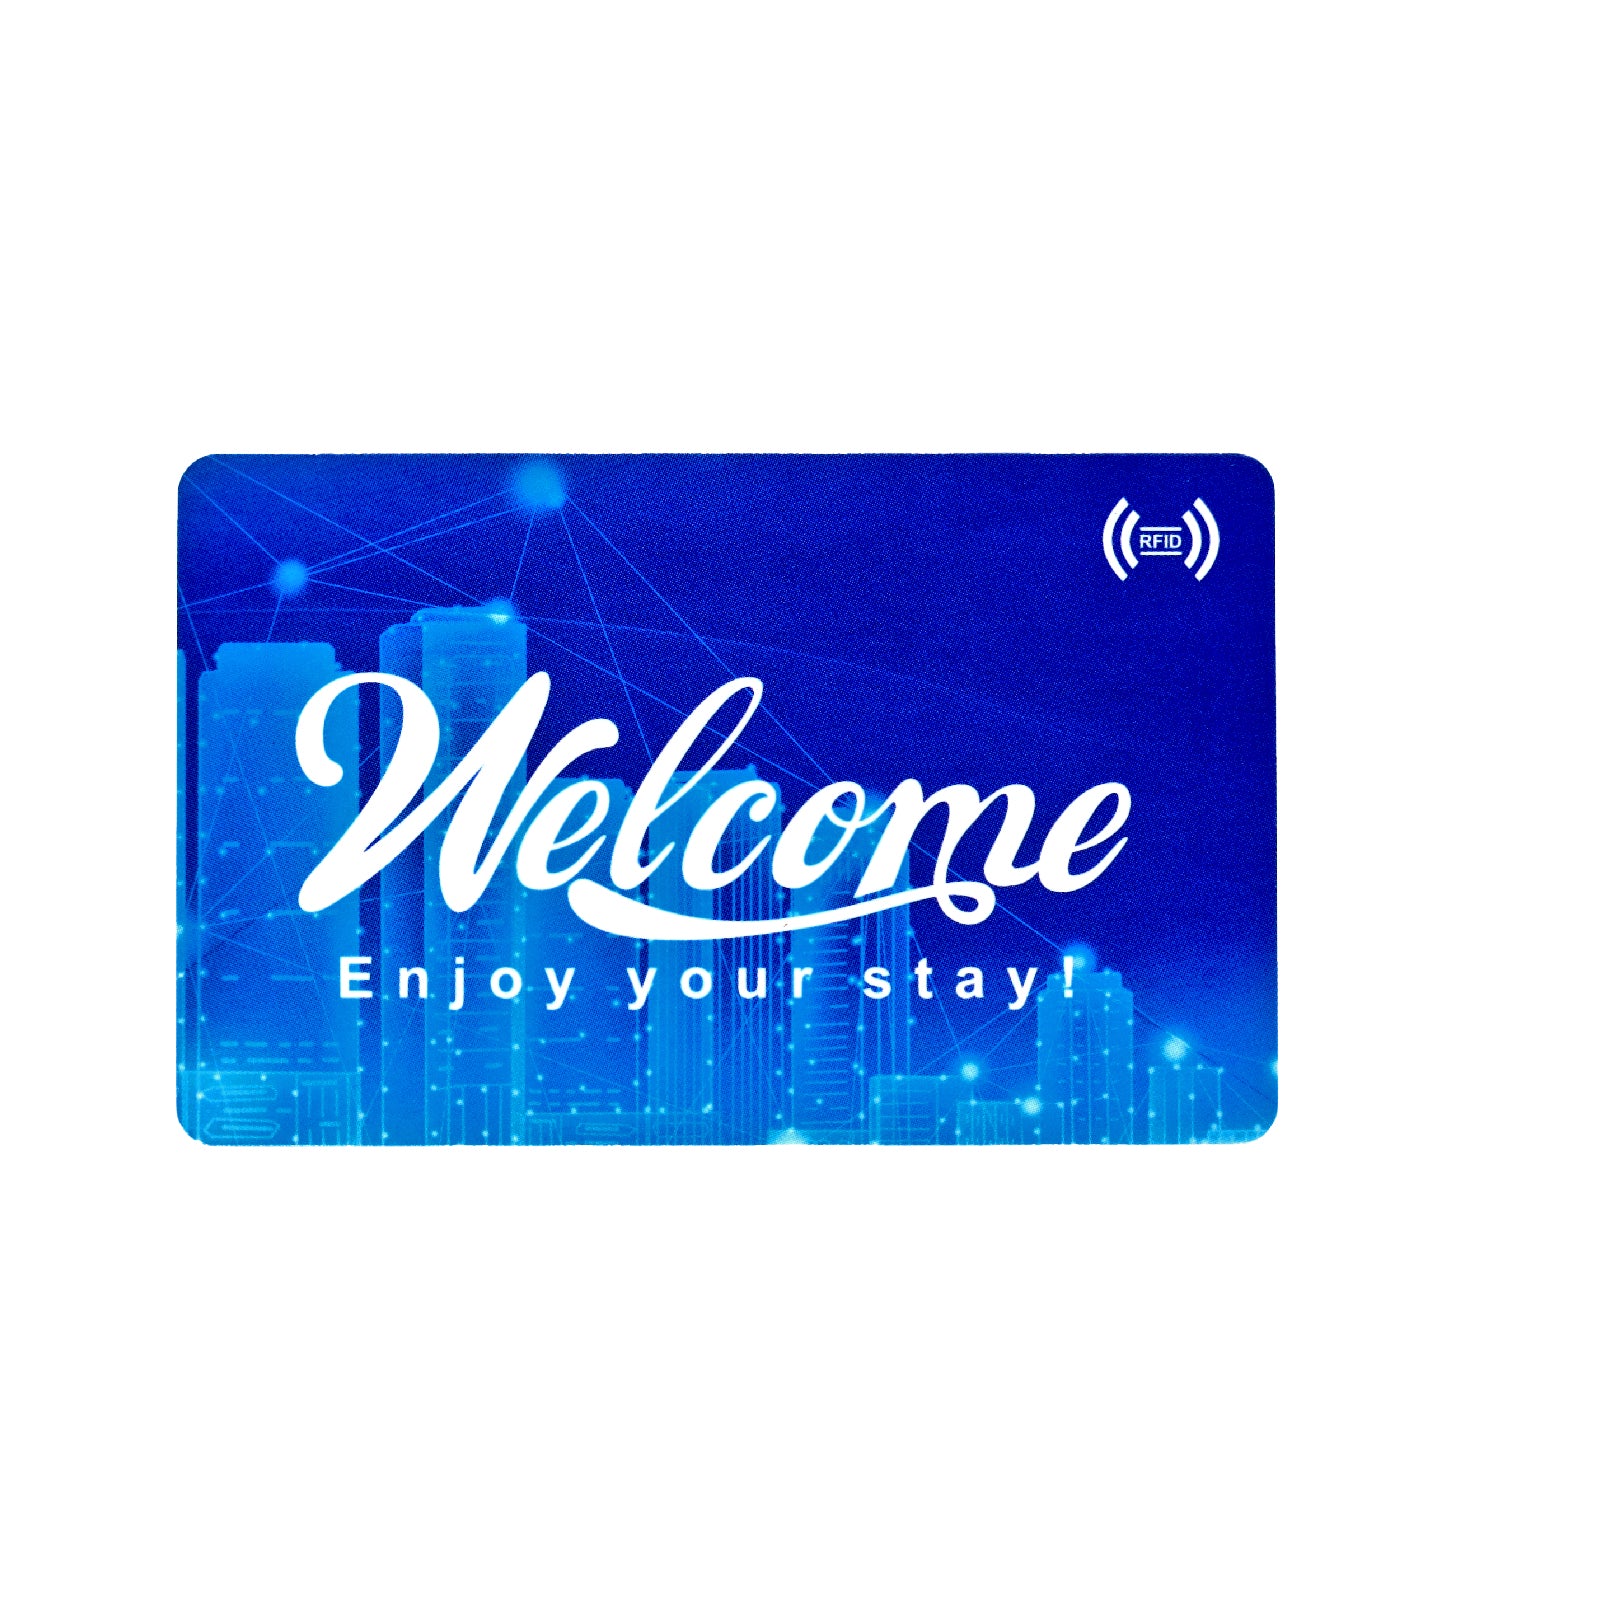 Gialer RFID Hotel Key Card, RFID Motel Key Card with Envelopes Sleeve Welcome Enjoy Your Stay